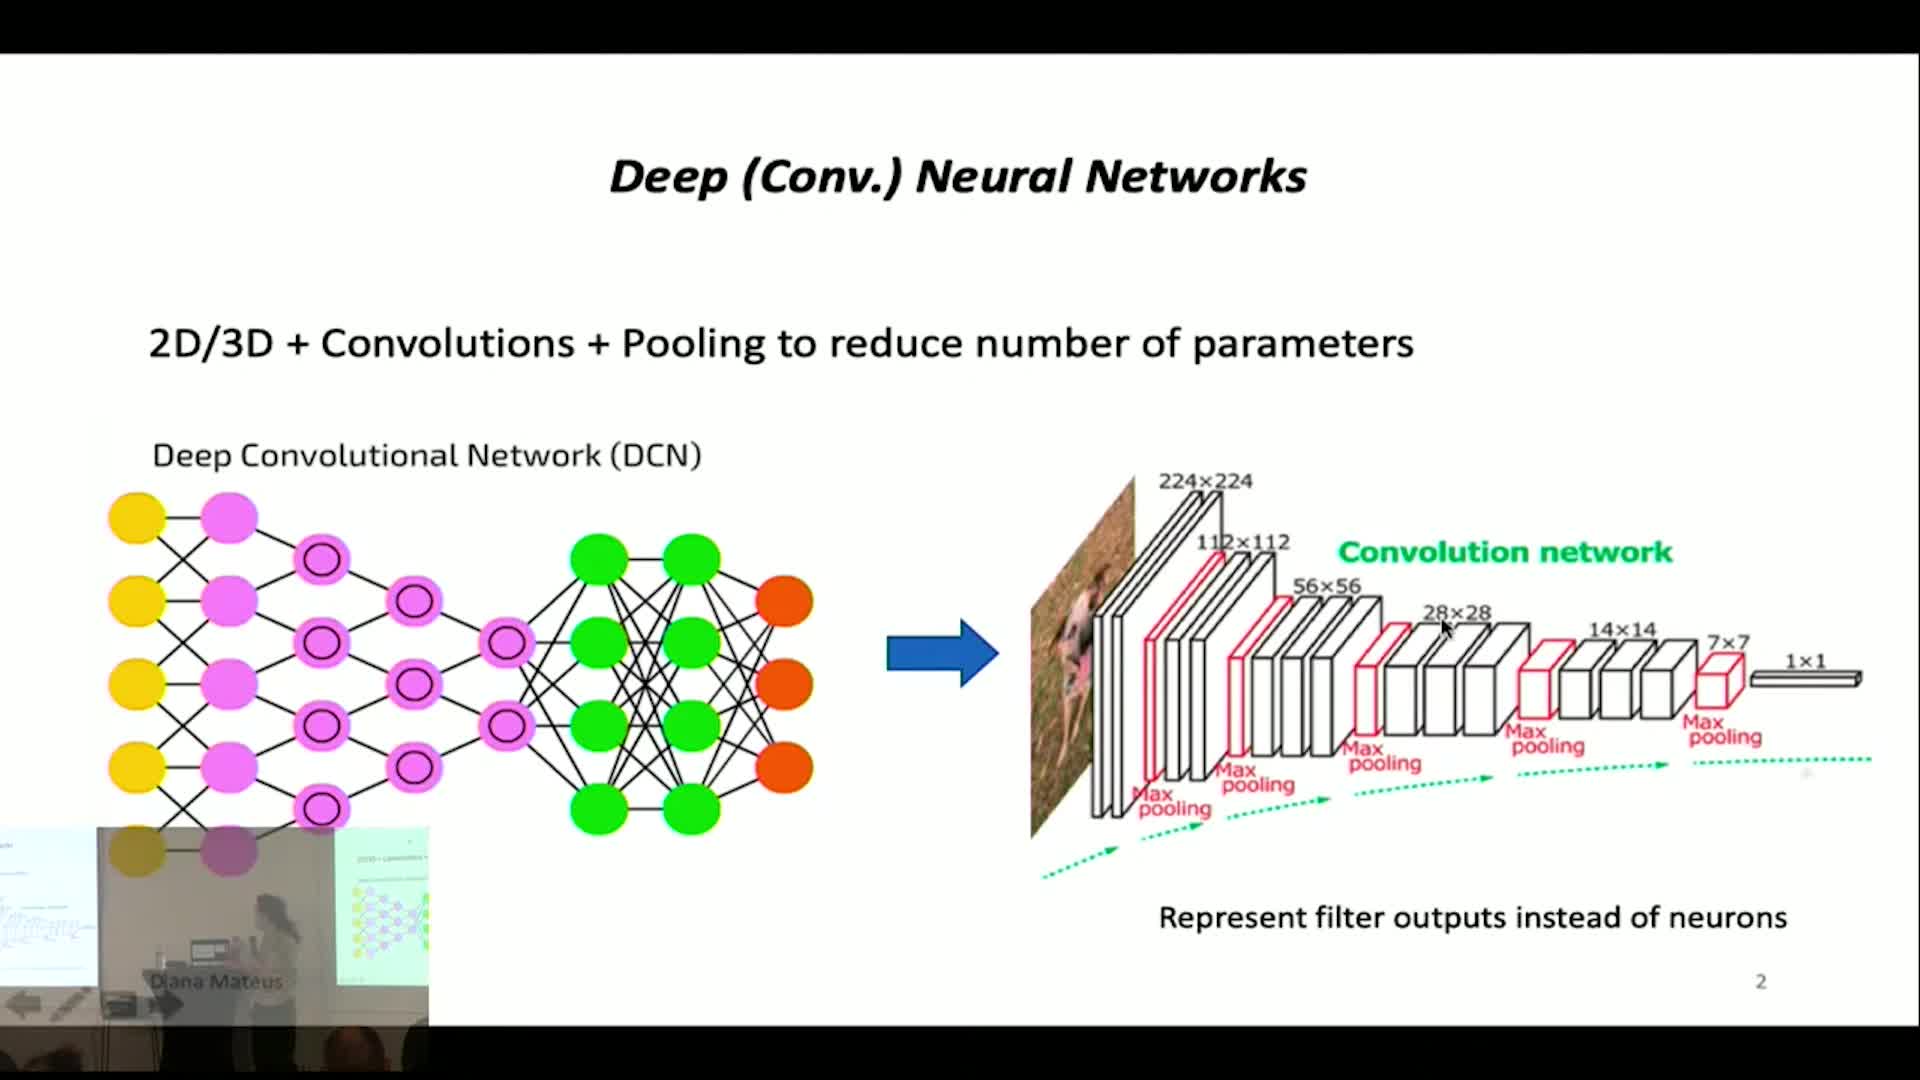 Deep Learning with Medical Images: learning with small datasets and few annotations - Diana Mateus